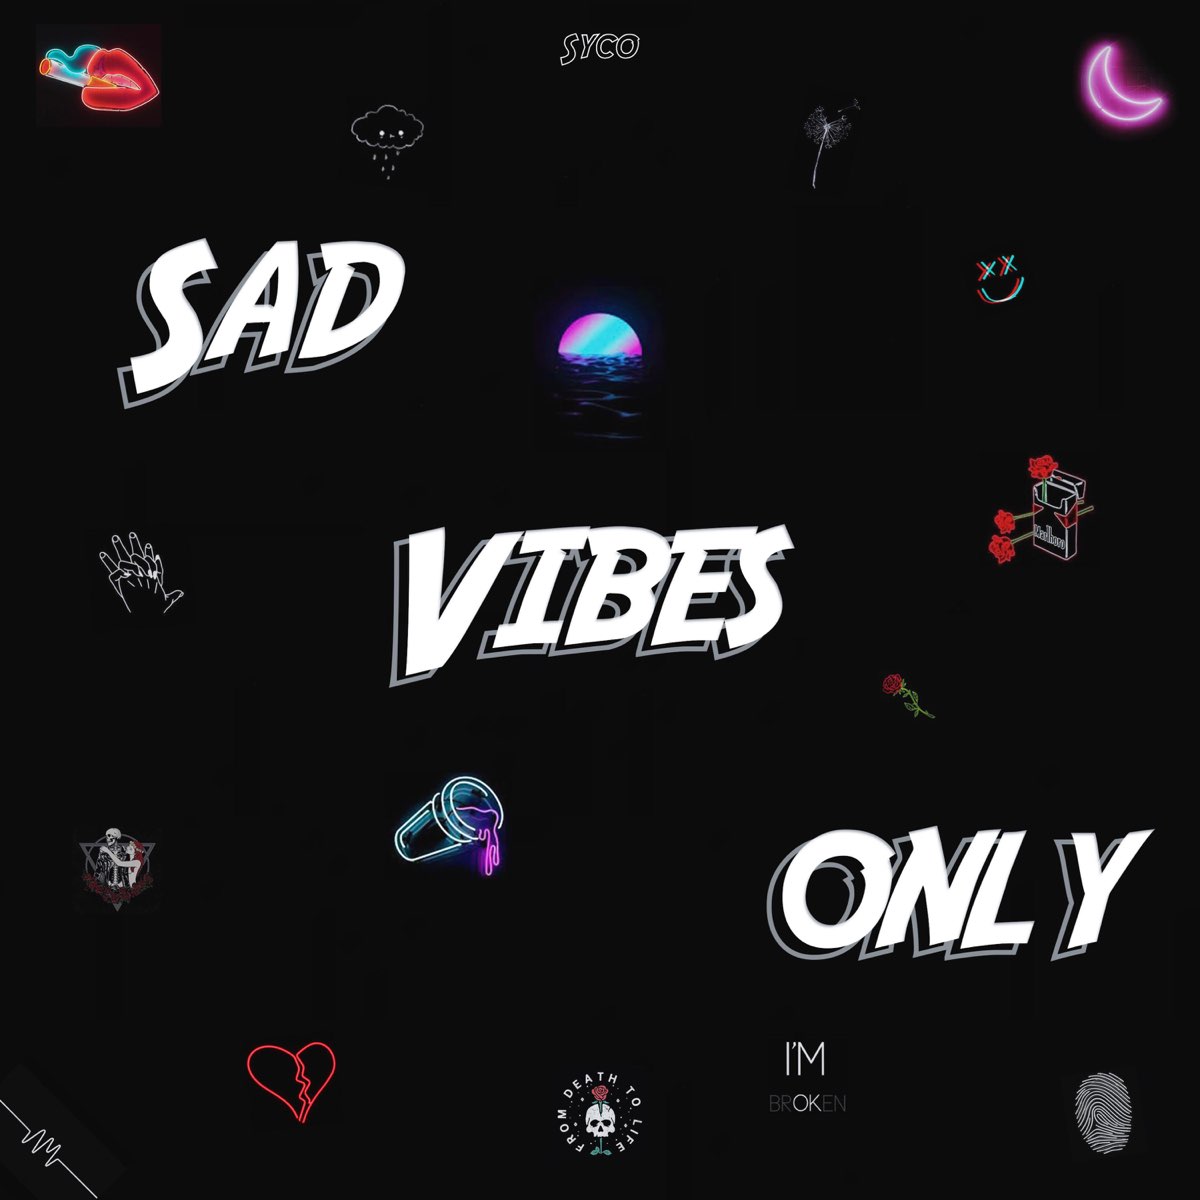 Download sad vibes wallpapers Free for Android  sad vibes wallpapers APK  Download  STEPrimocom